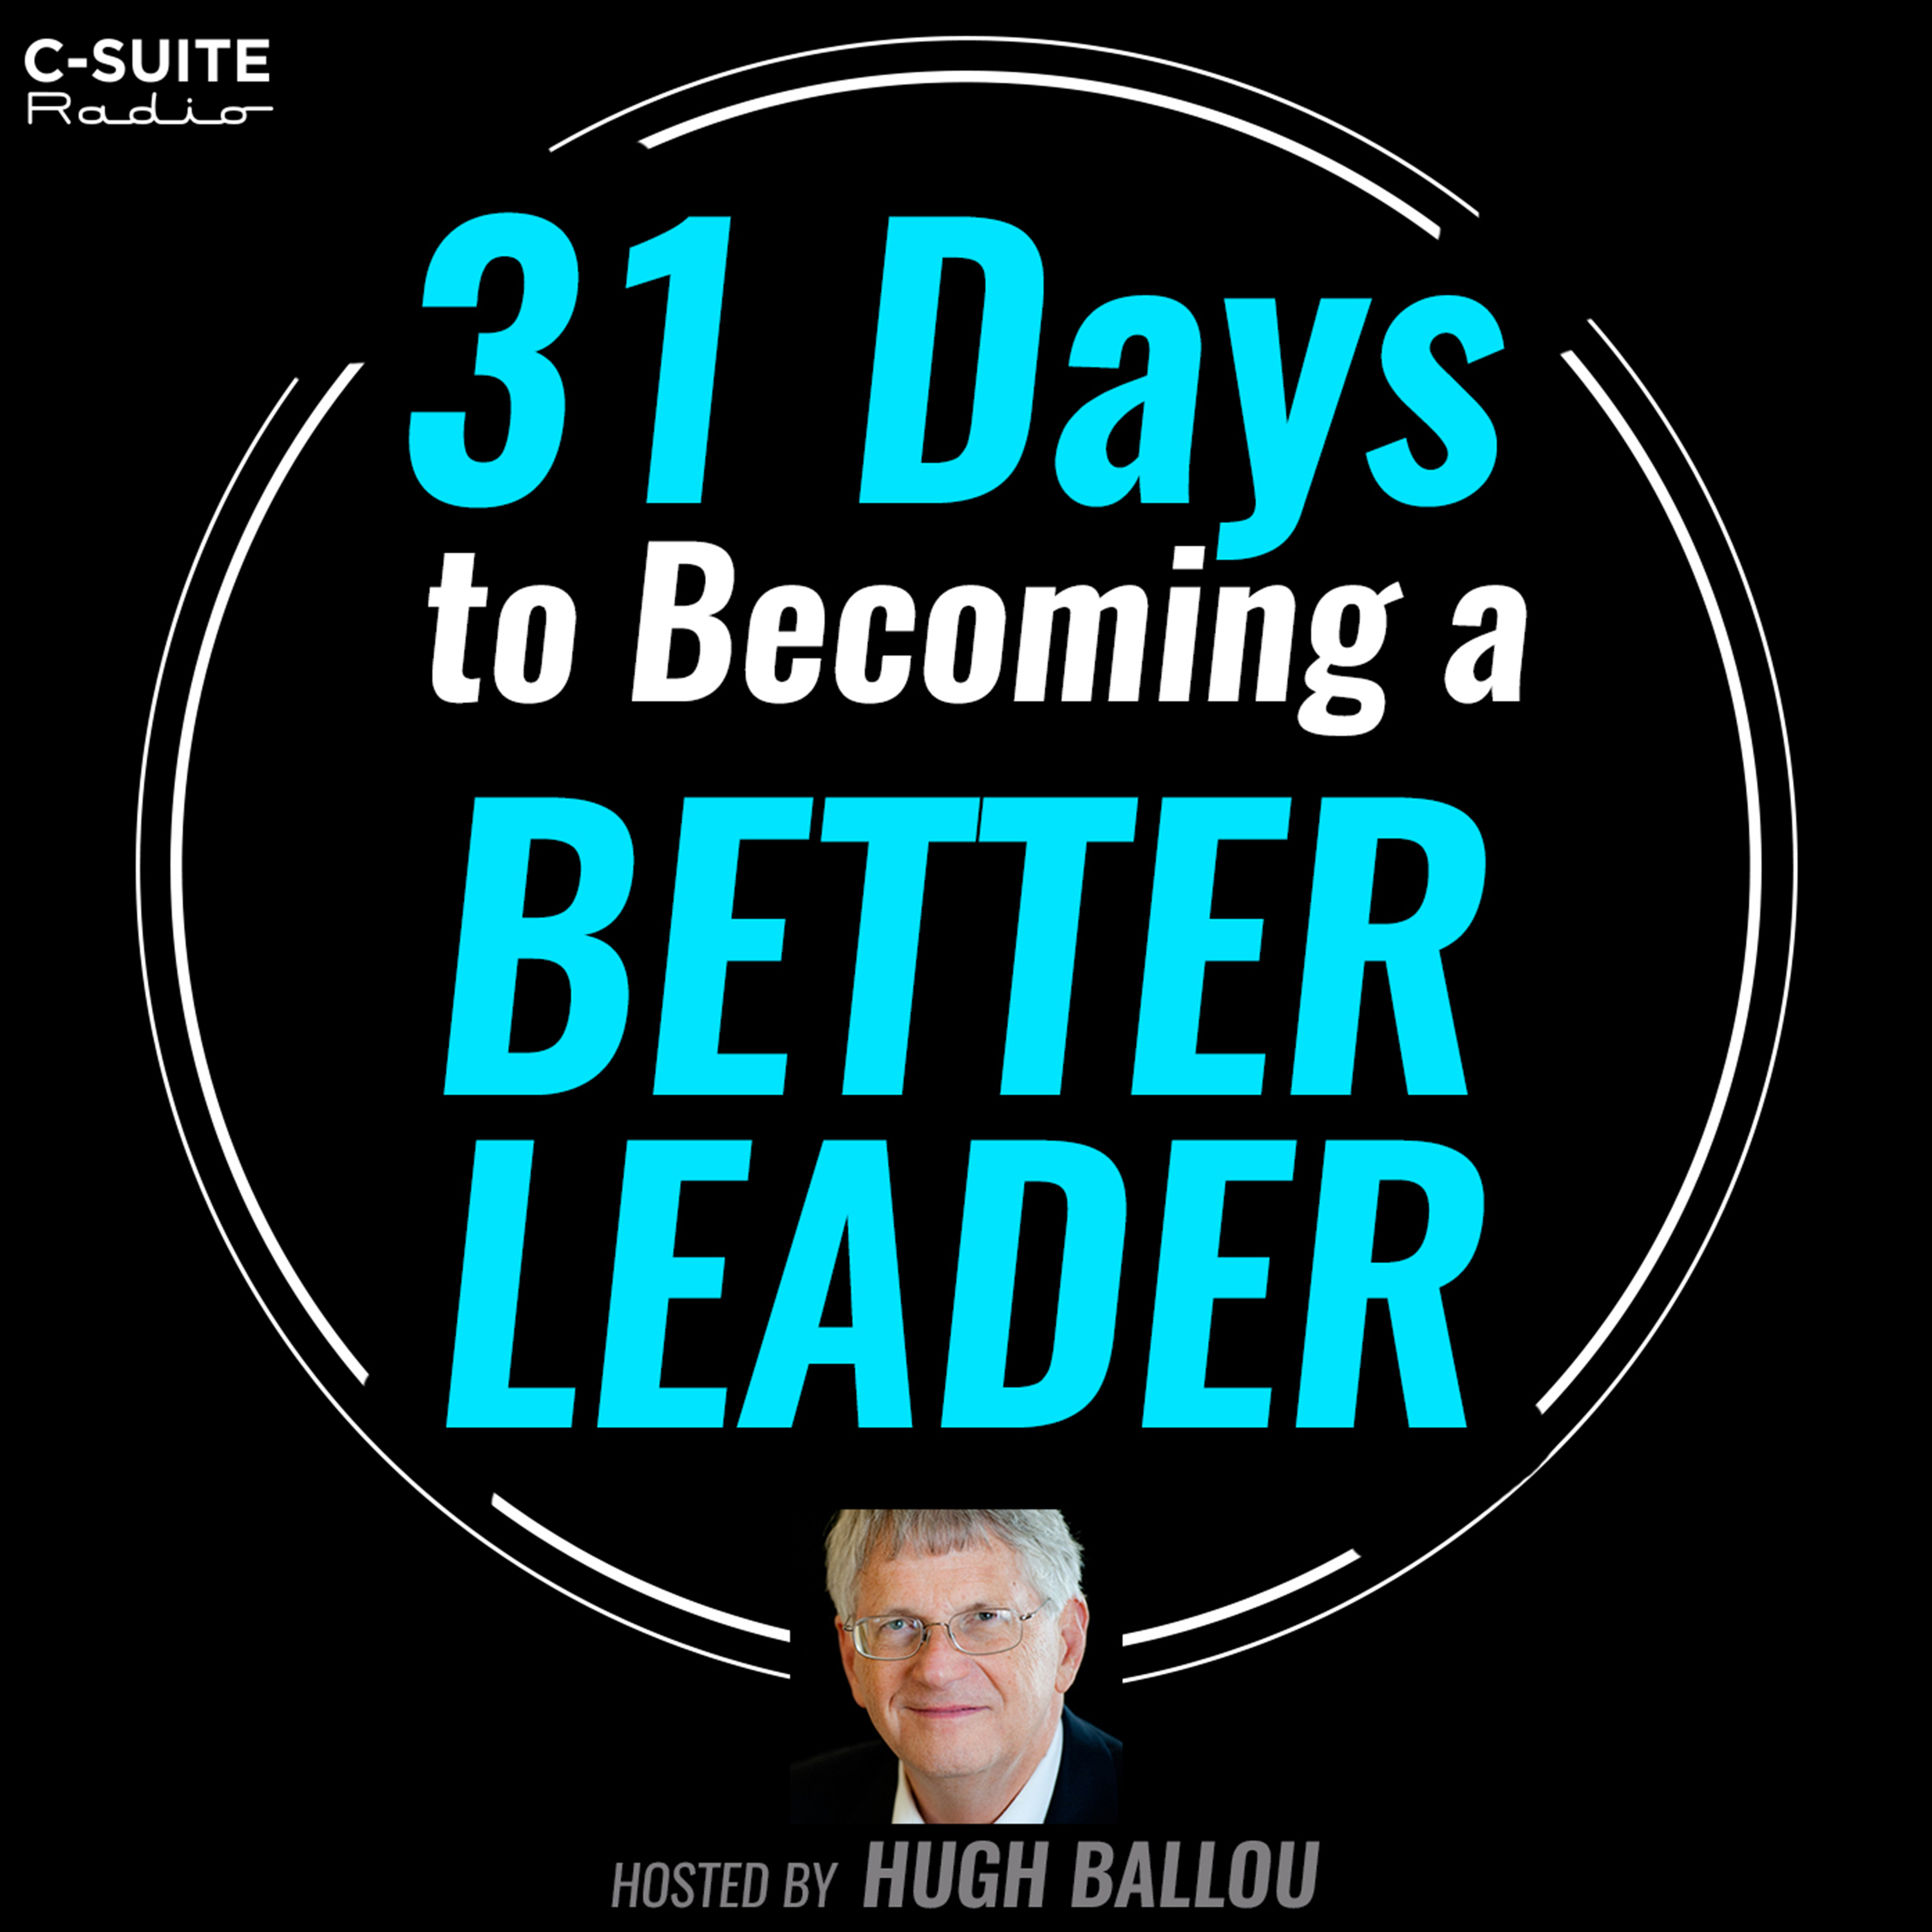 31 Days to Becoming a Better Leader